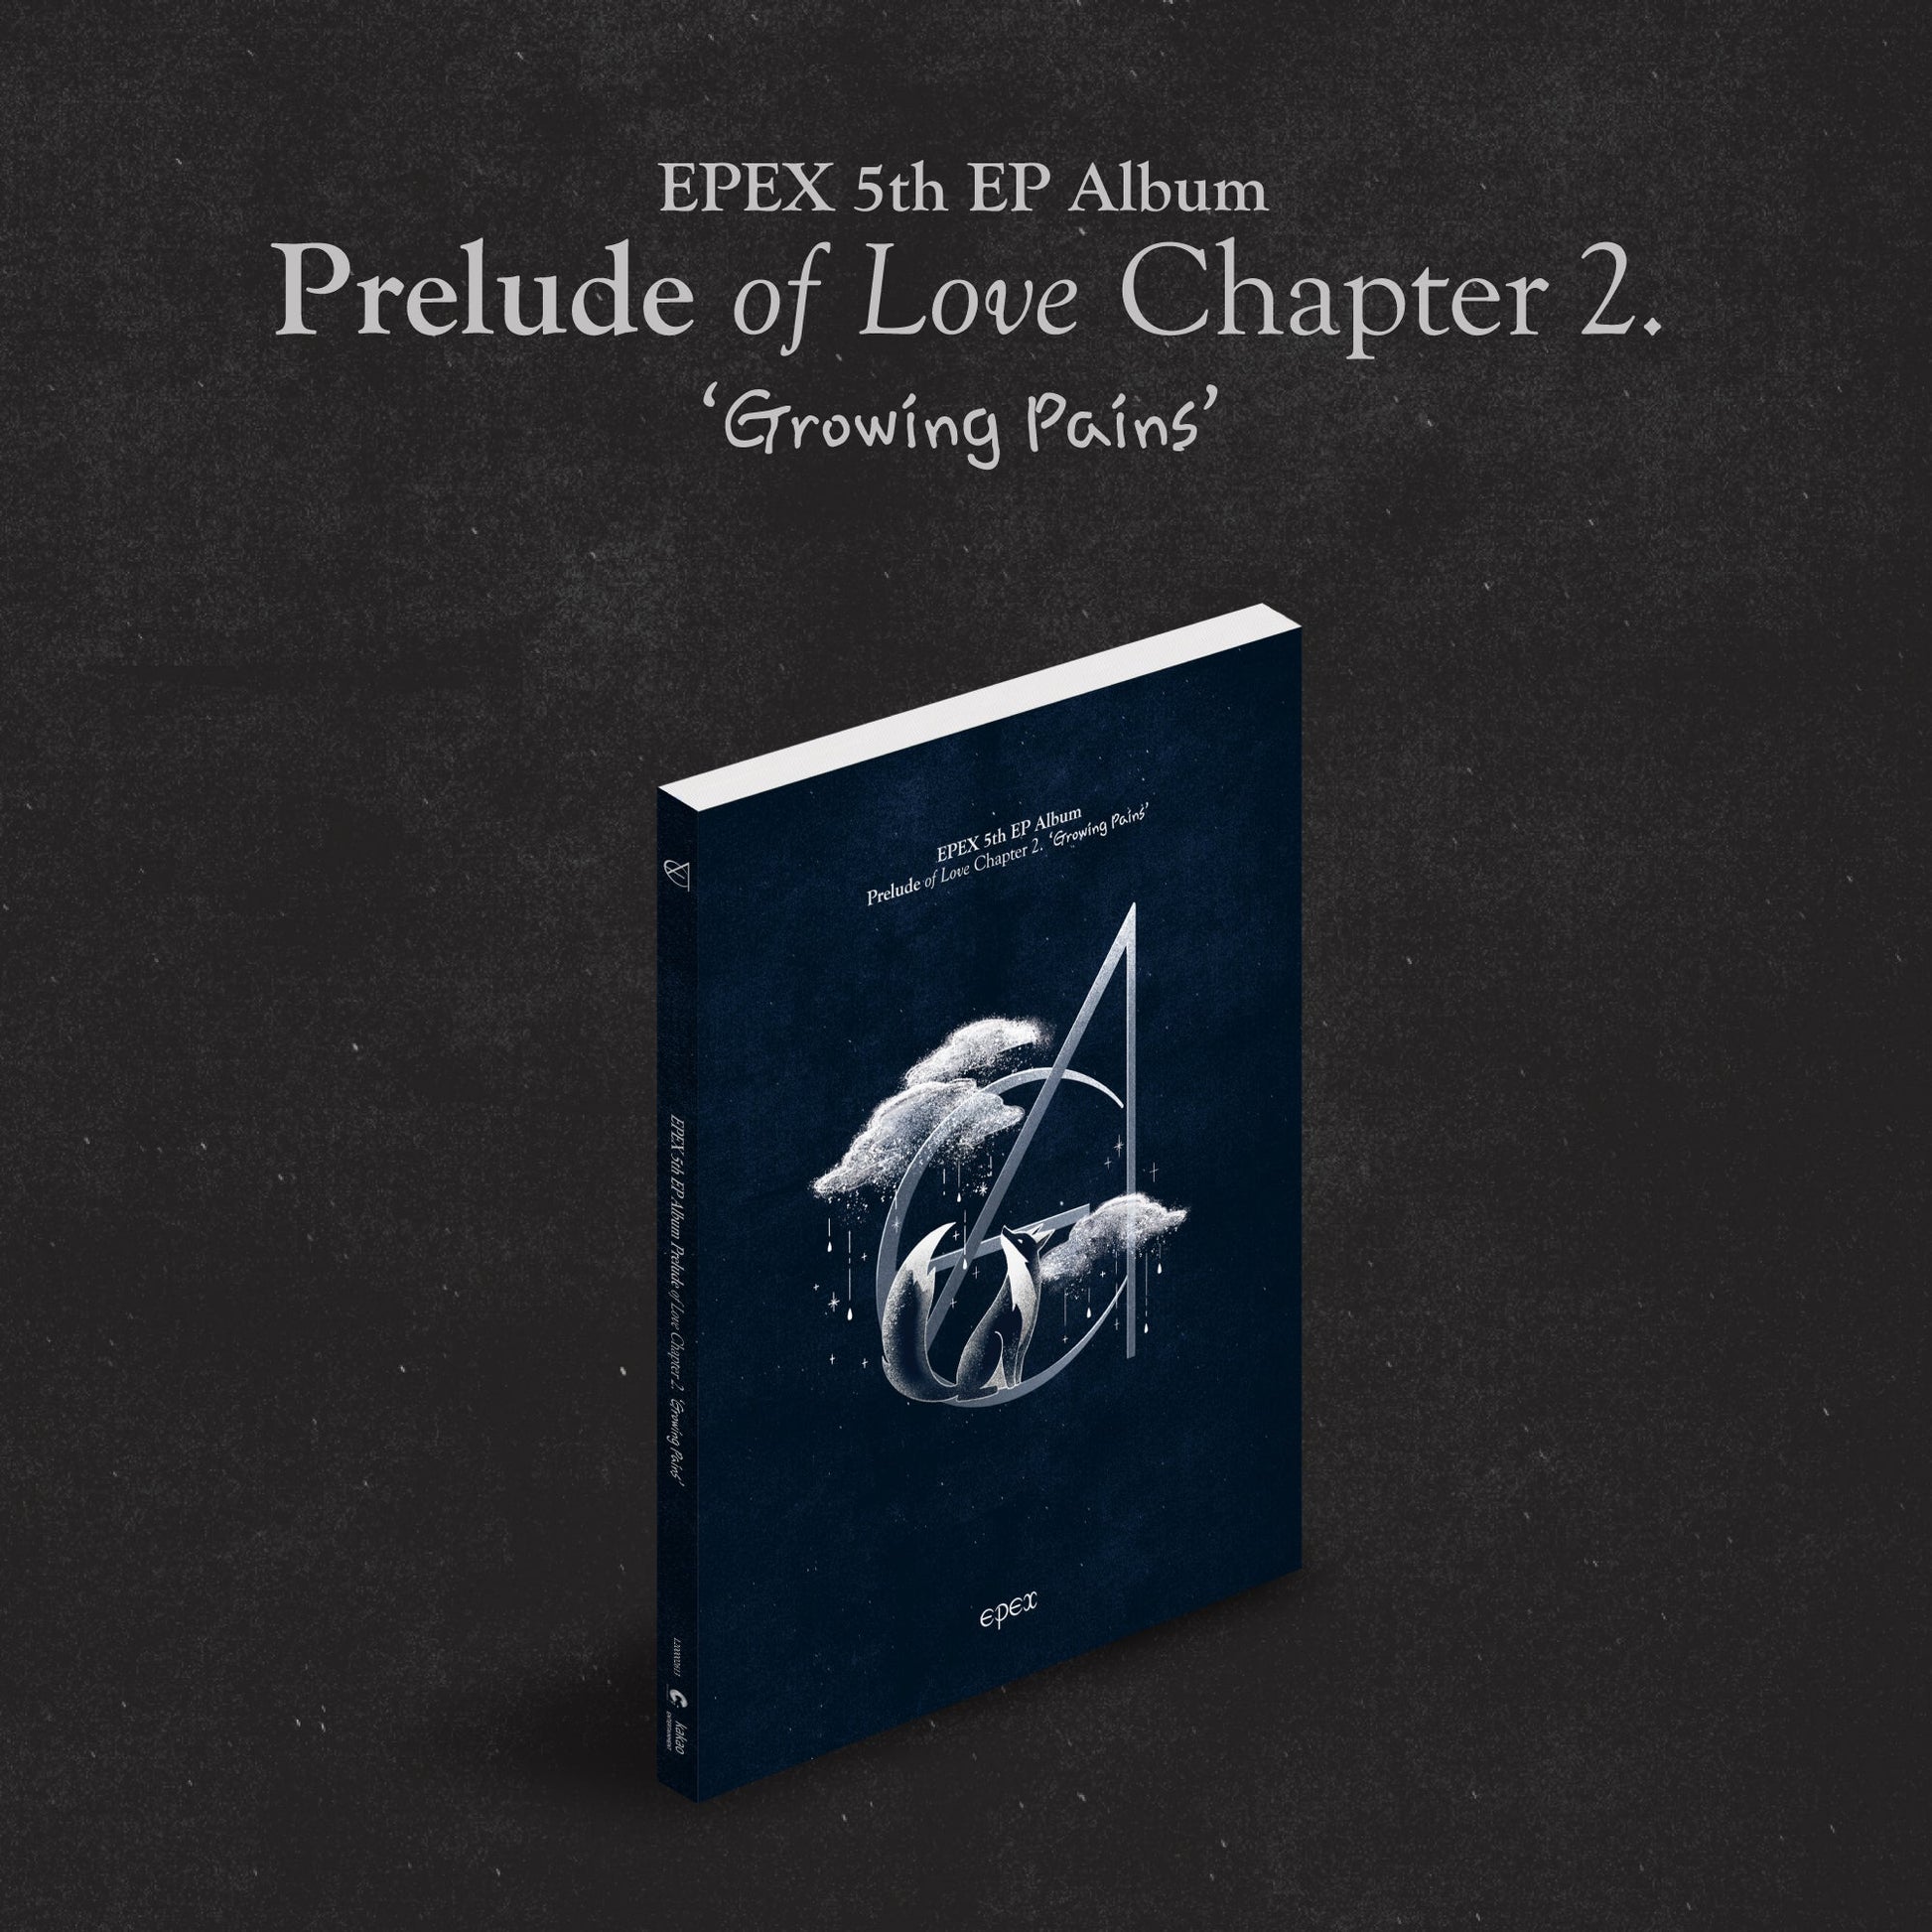 EPEX 5TH EP ALBUM 'PRELUDE OF LOVE CHAPTER 2' FOX VERSION COVER